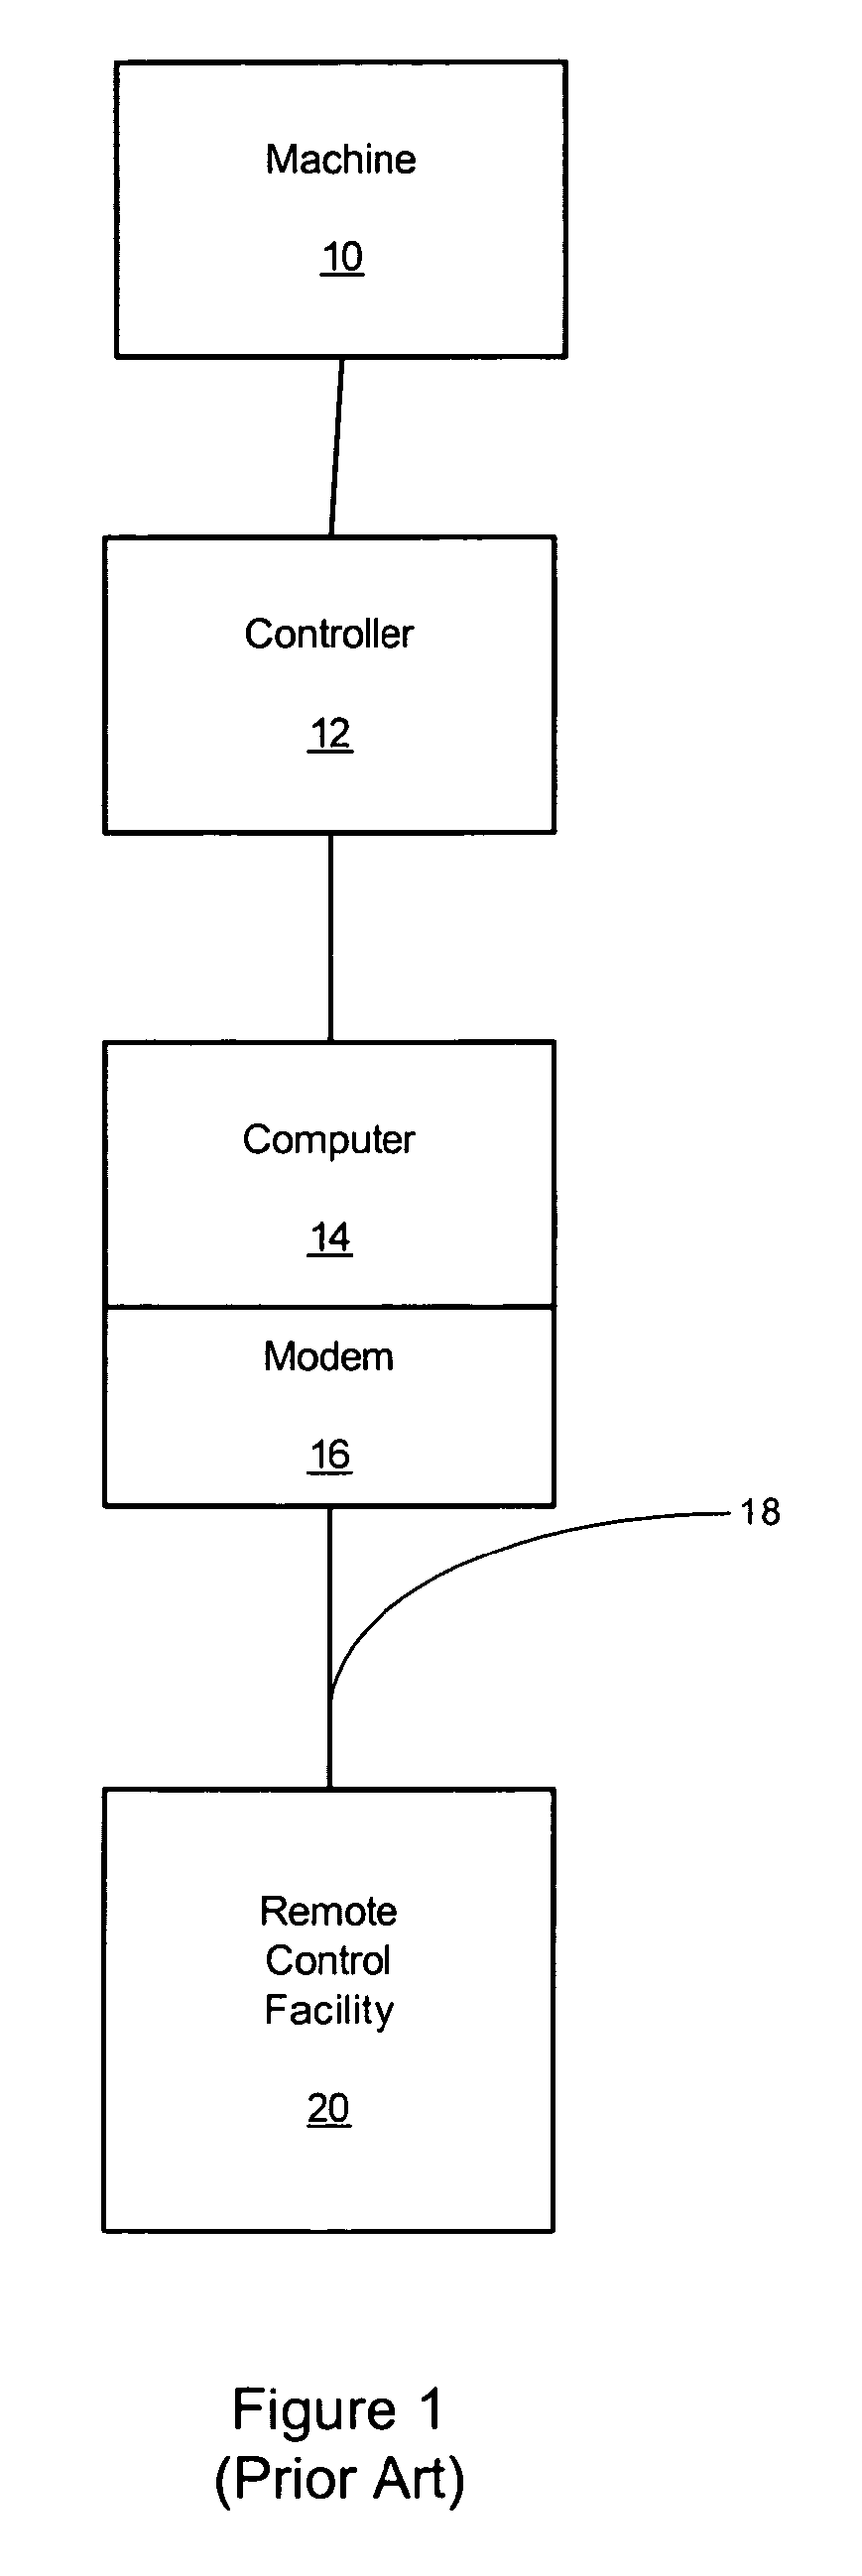 Human-machine interface system and method for remotely monitoring and controlling a machine